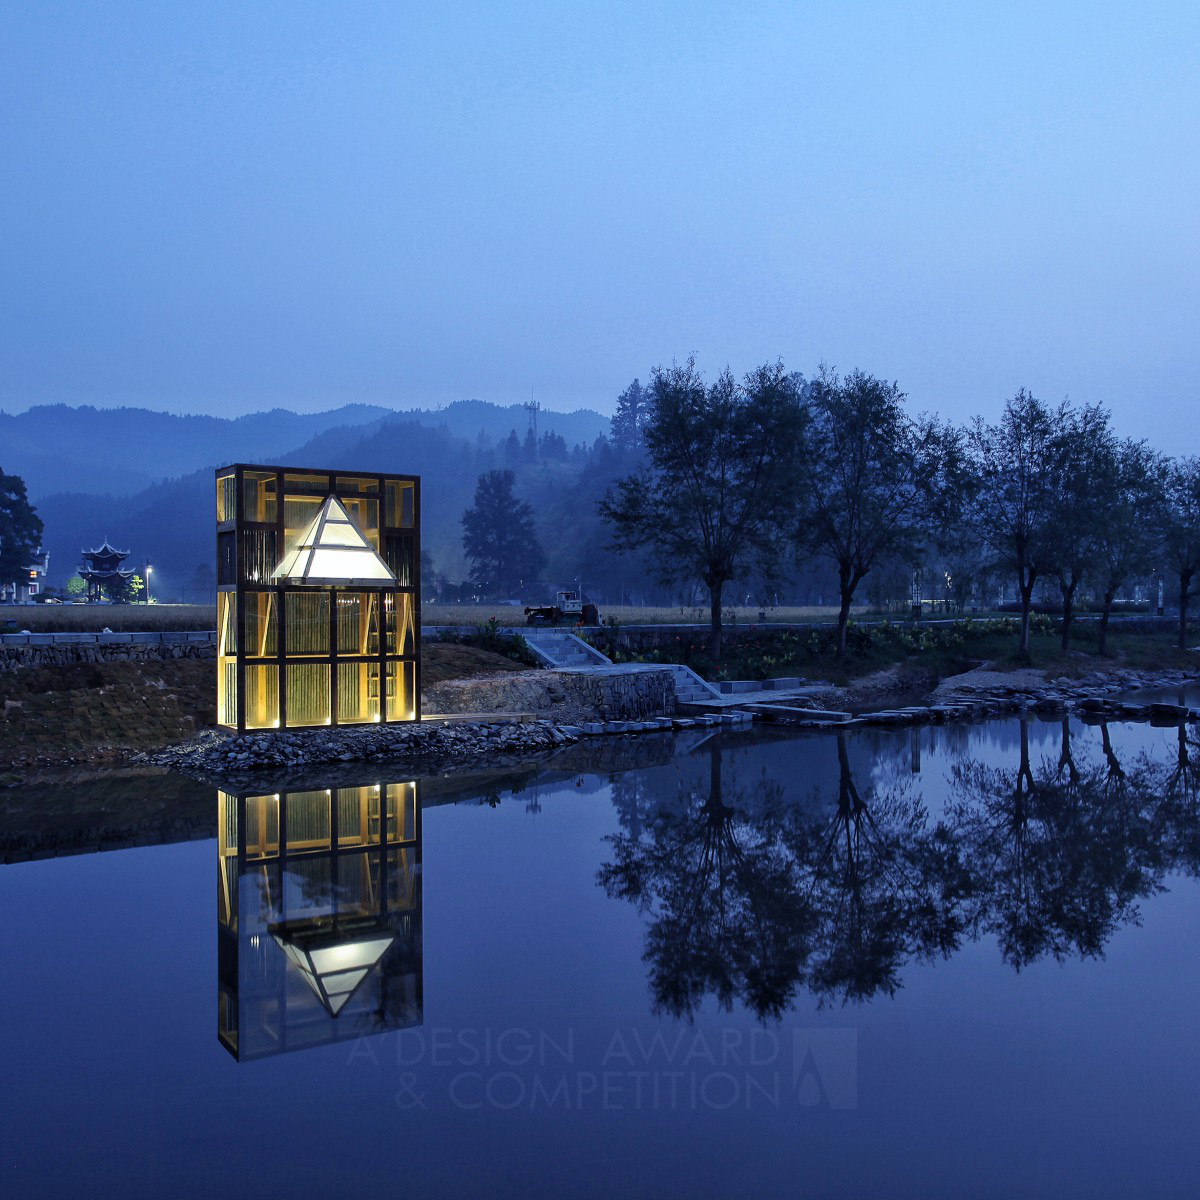 mirrored sight shelter viewing house, tea house by Li Hao